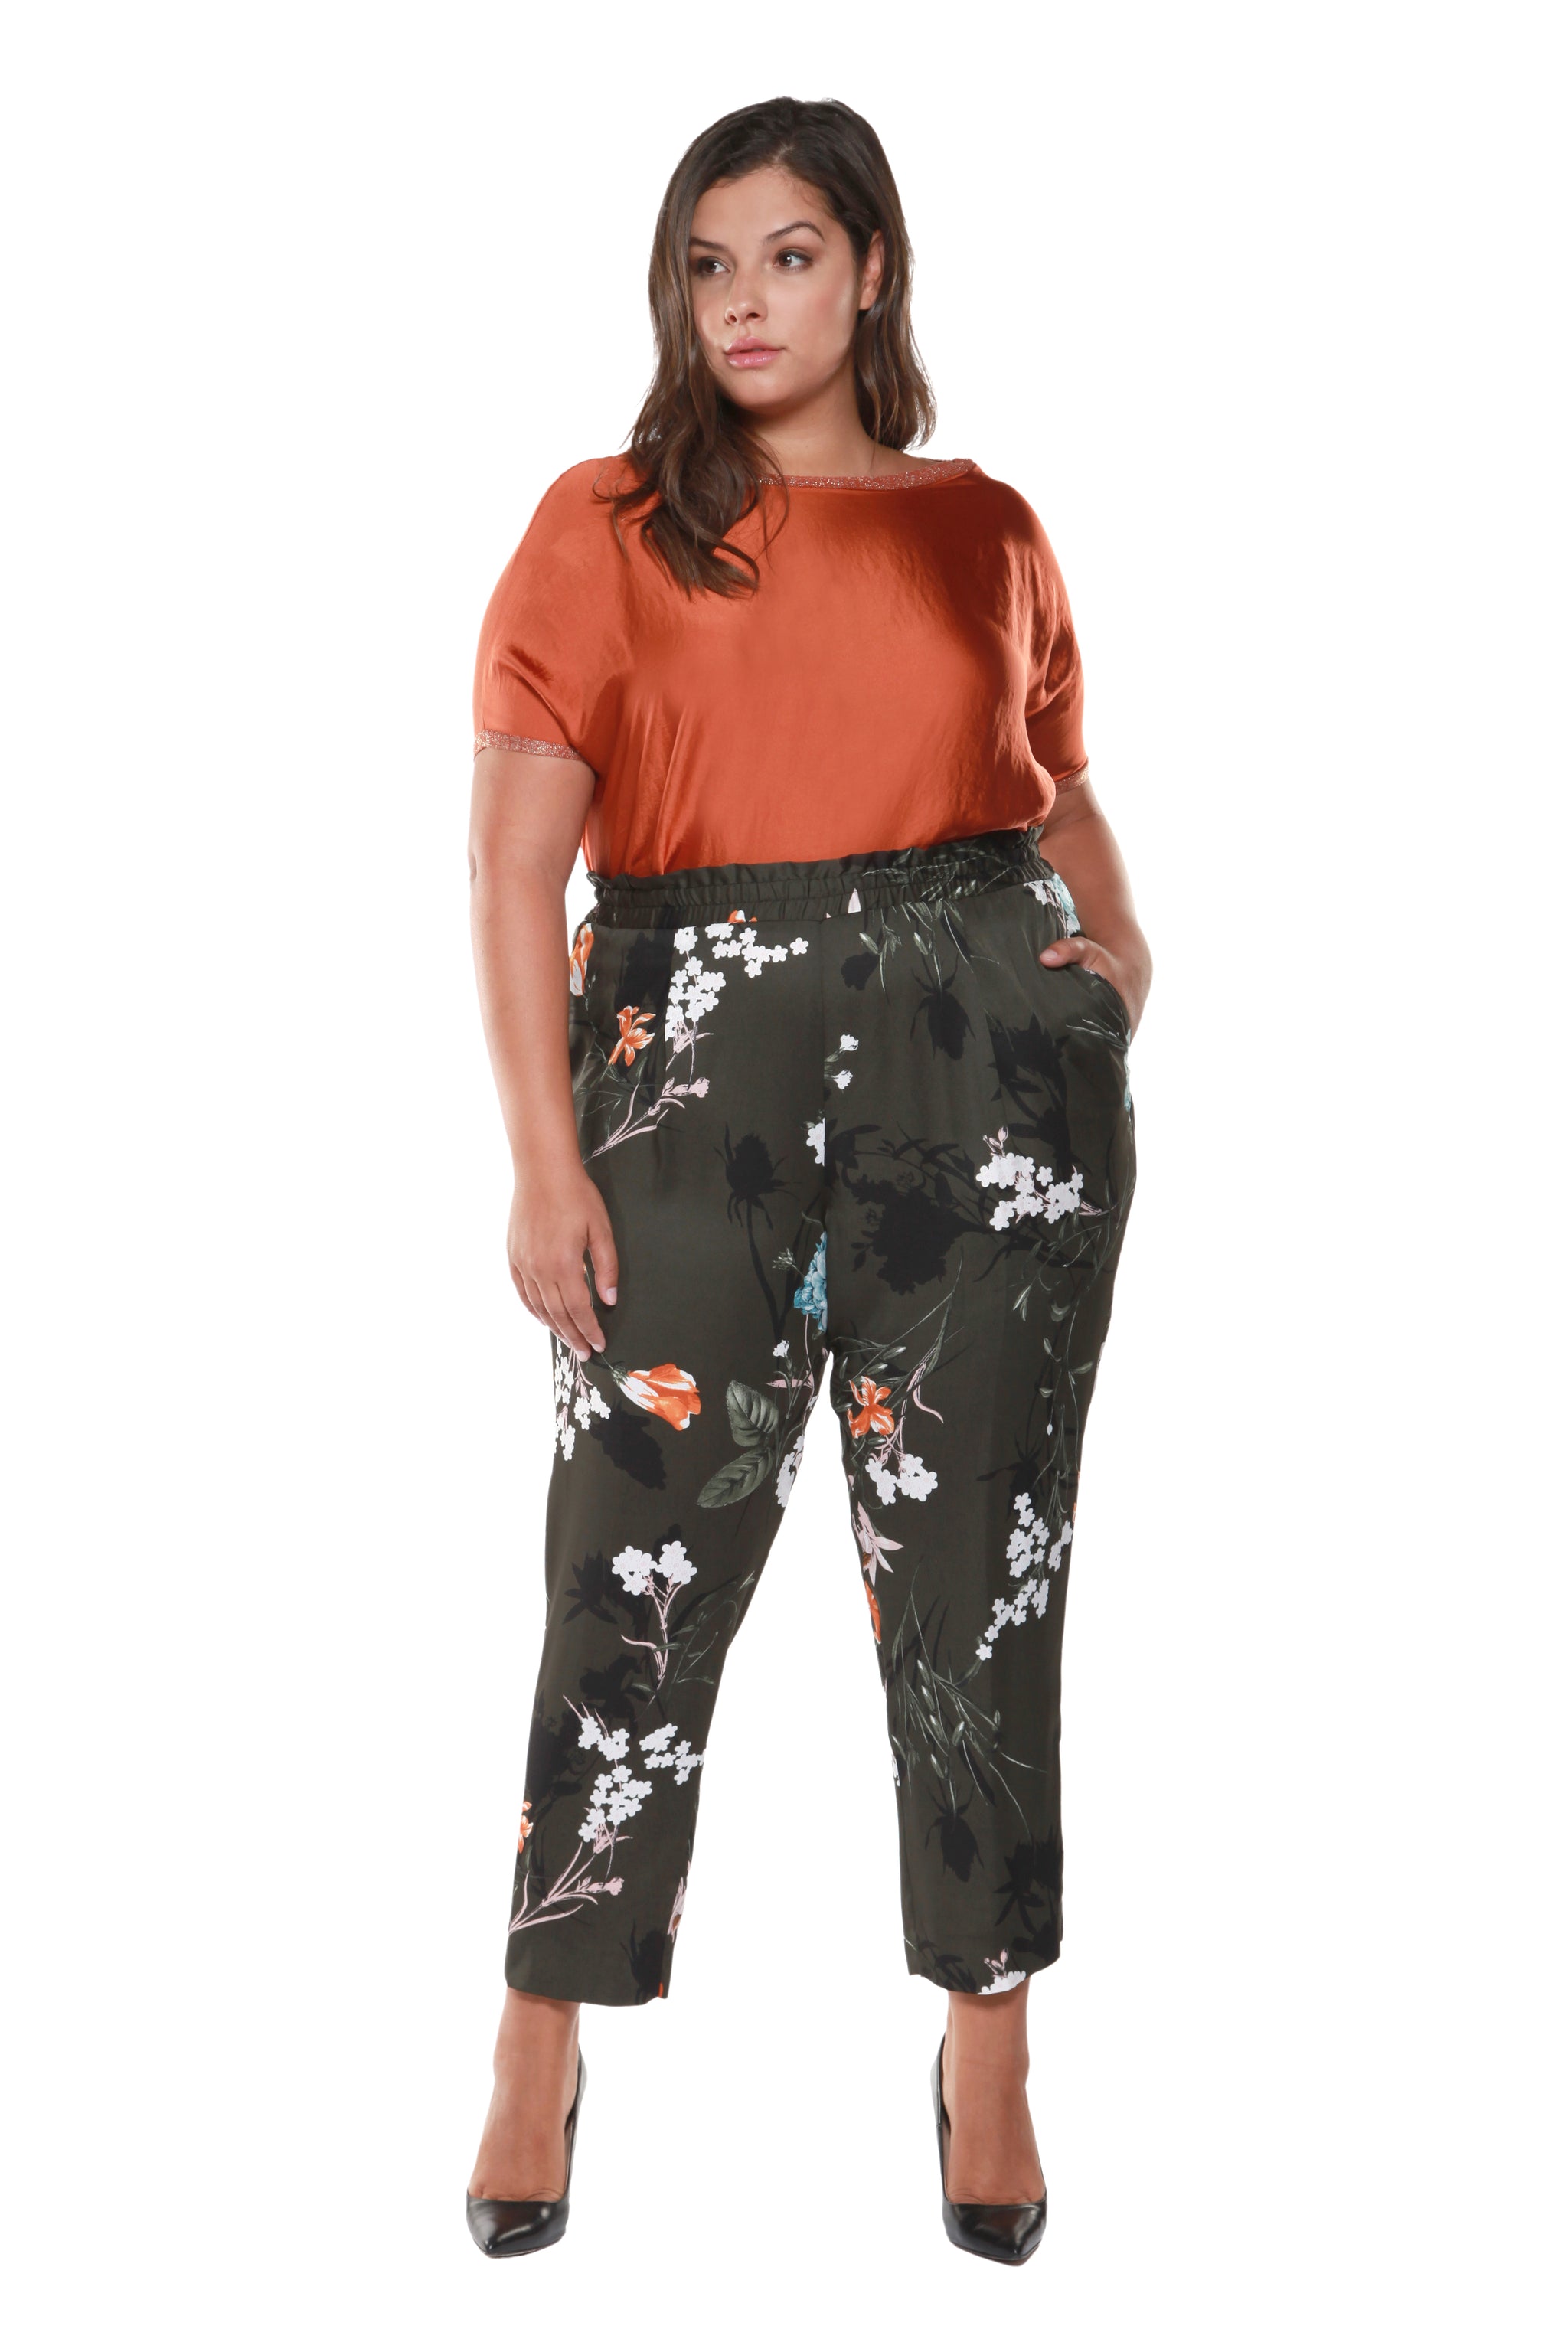 Plus Size Olive Green Floral Printed Pants at MARIA VINCENT